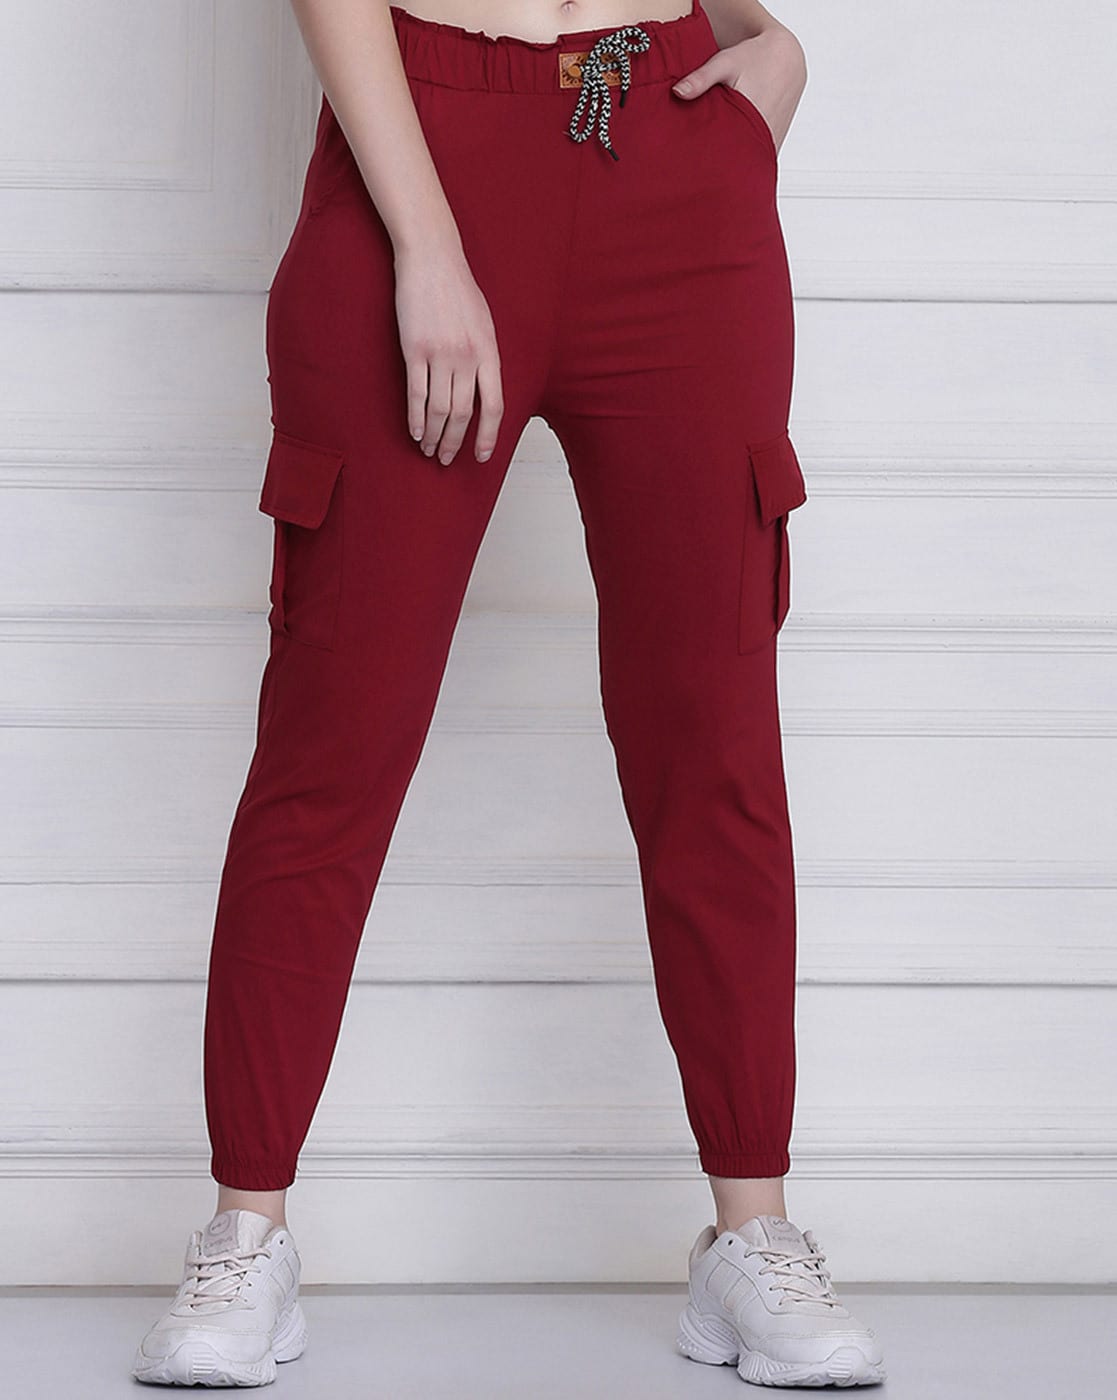 Buy Ruby Wine Gap Twill Cotton Cargo Pants Online At Best Prices | Tistabene